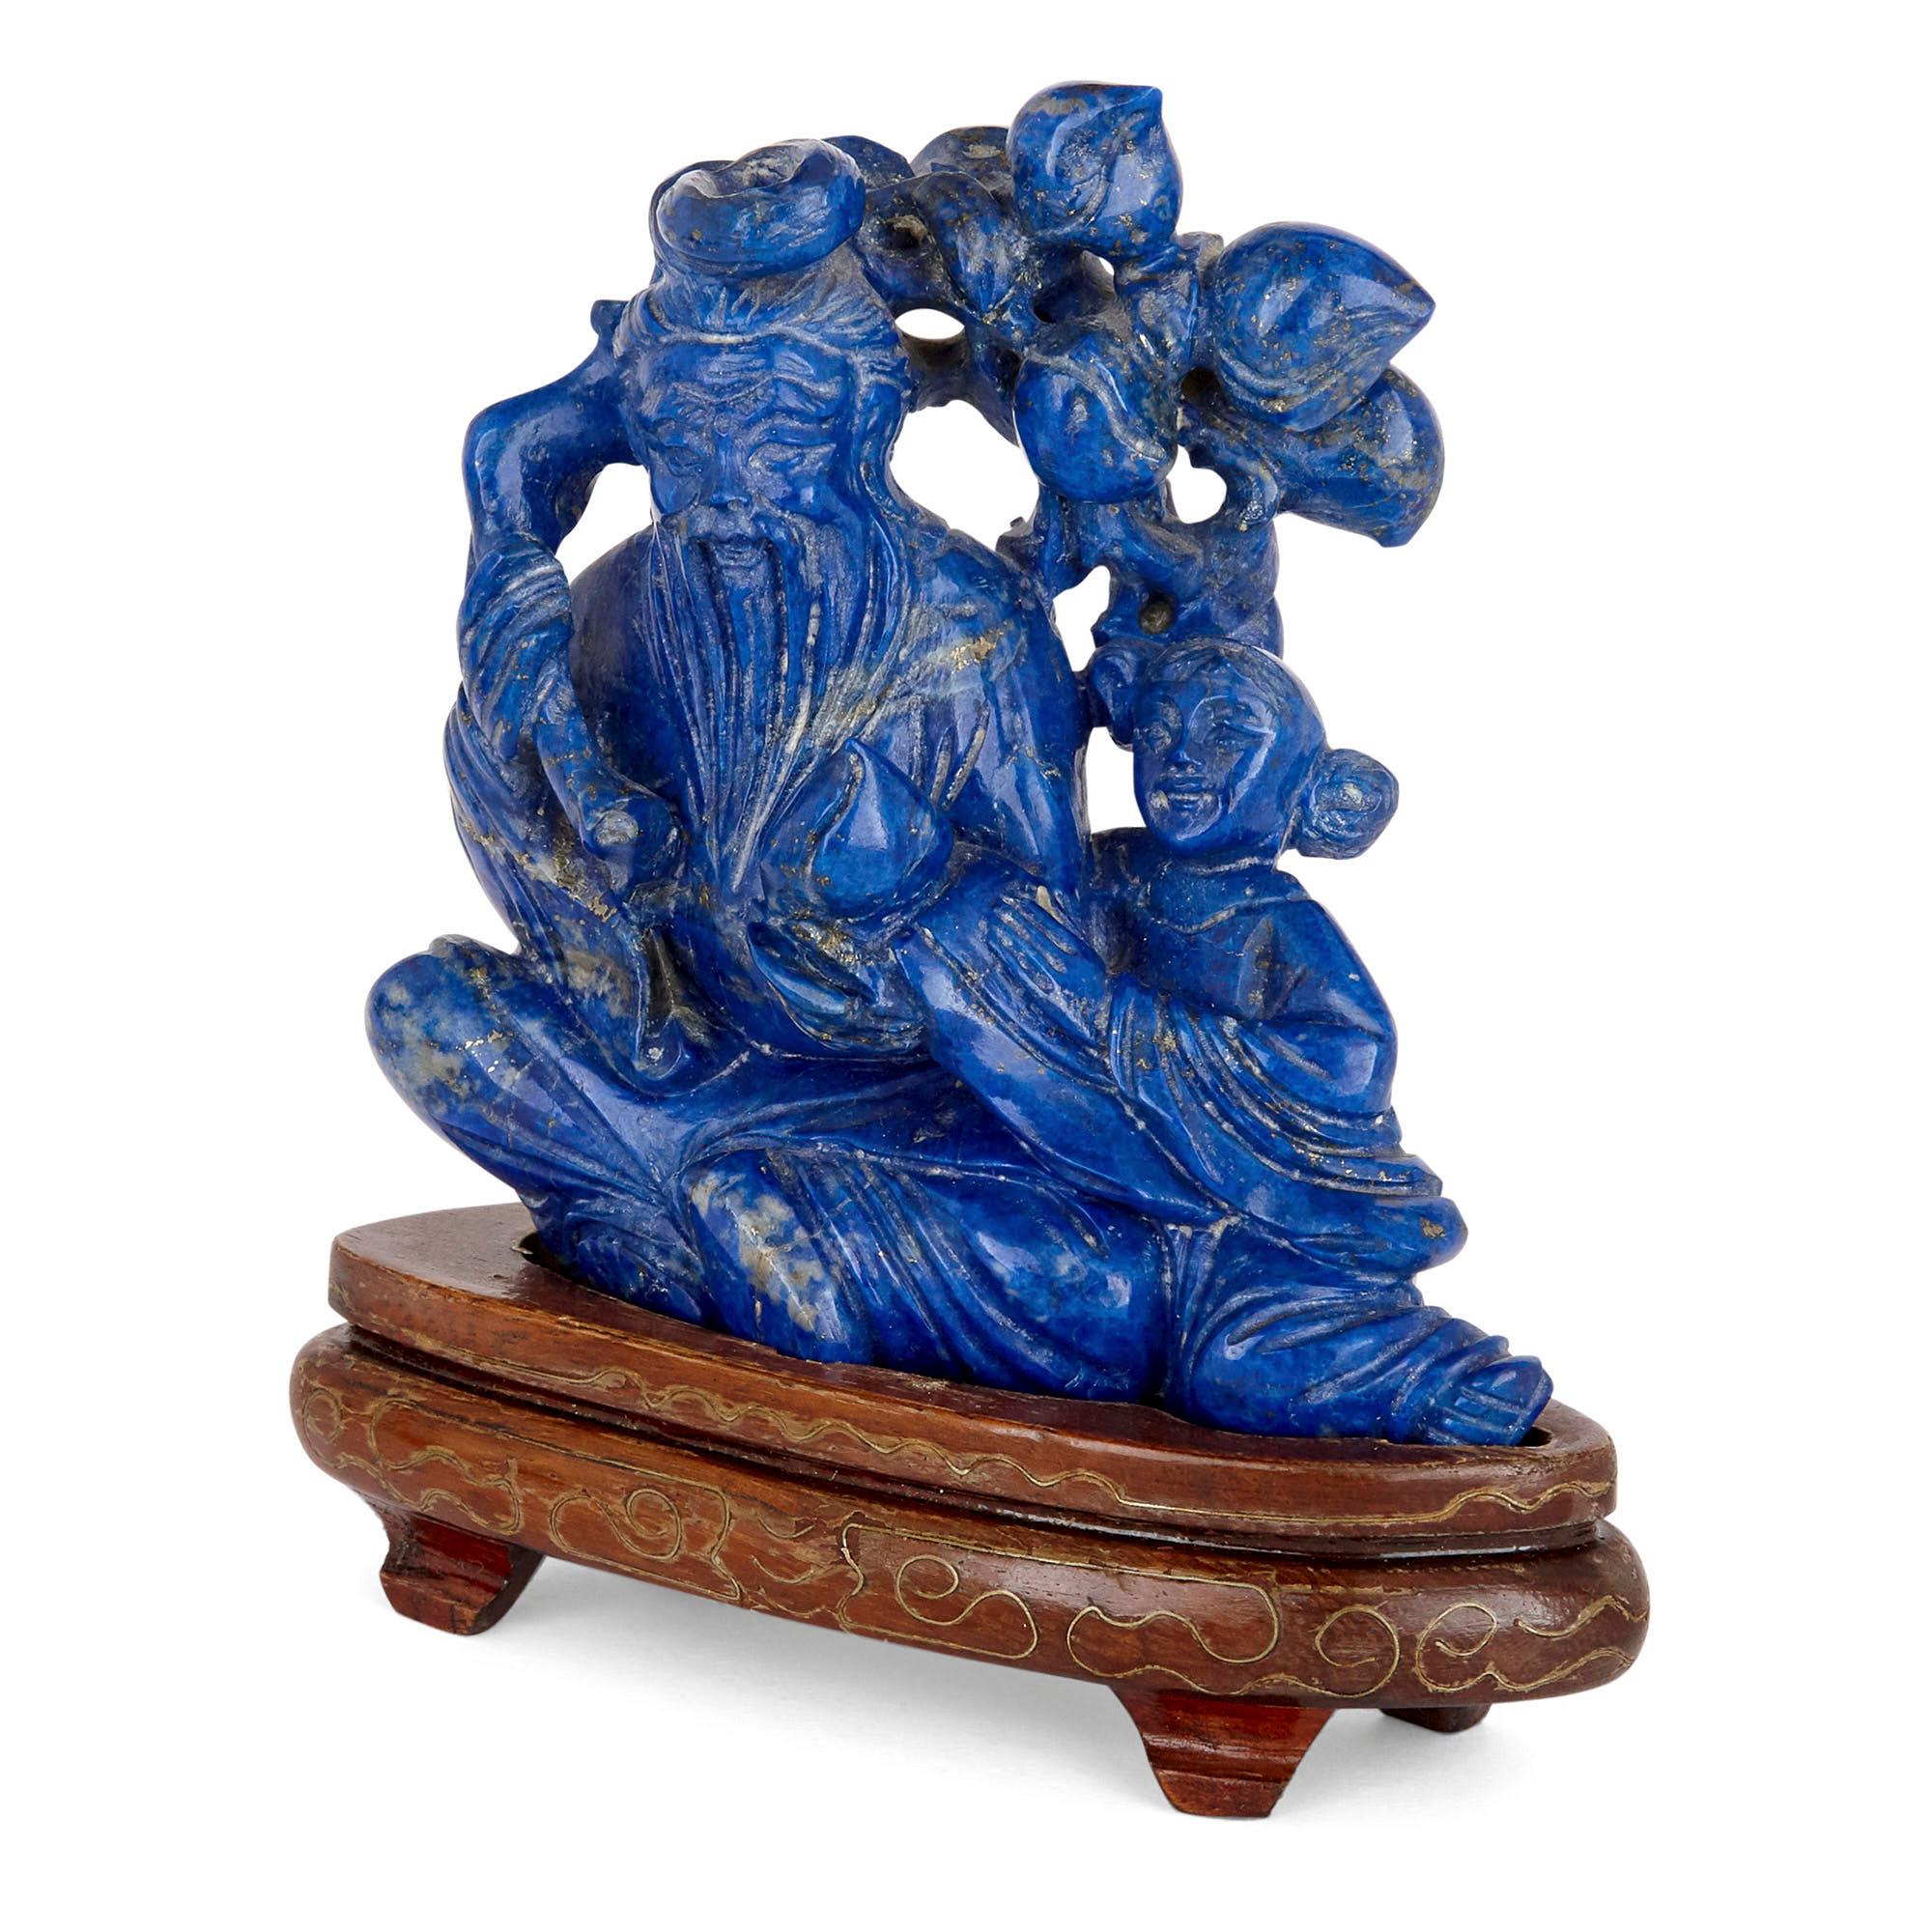 The six carved lapis lazuli pieces in this set depict various deities and entities special to the Hindu and Buddhist faiths. Three pieces portray the Hindu god Ganesha, while another depicts the Buddha. A fifth piece represents a rabbit, while the